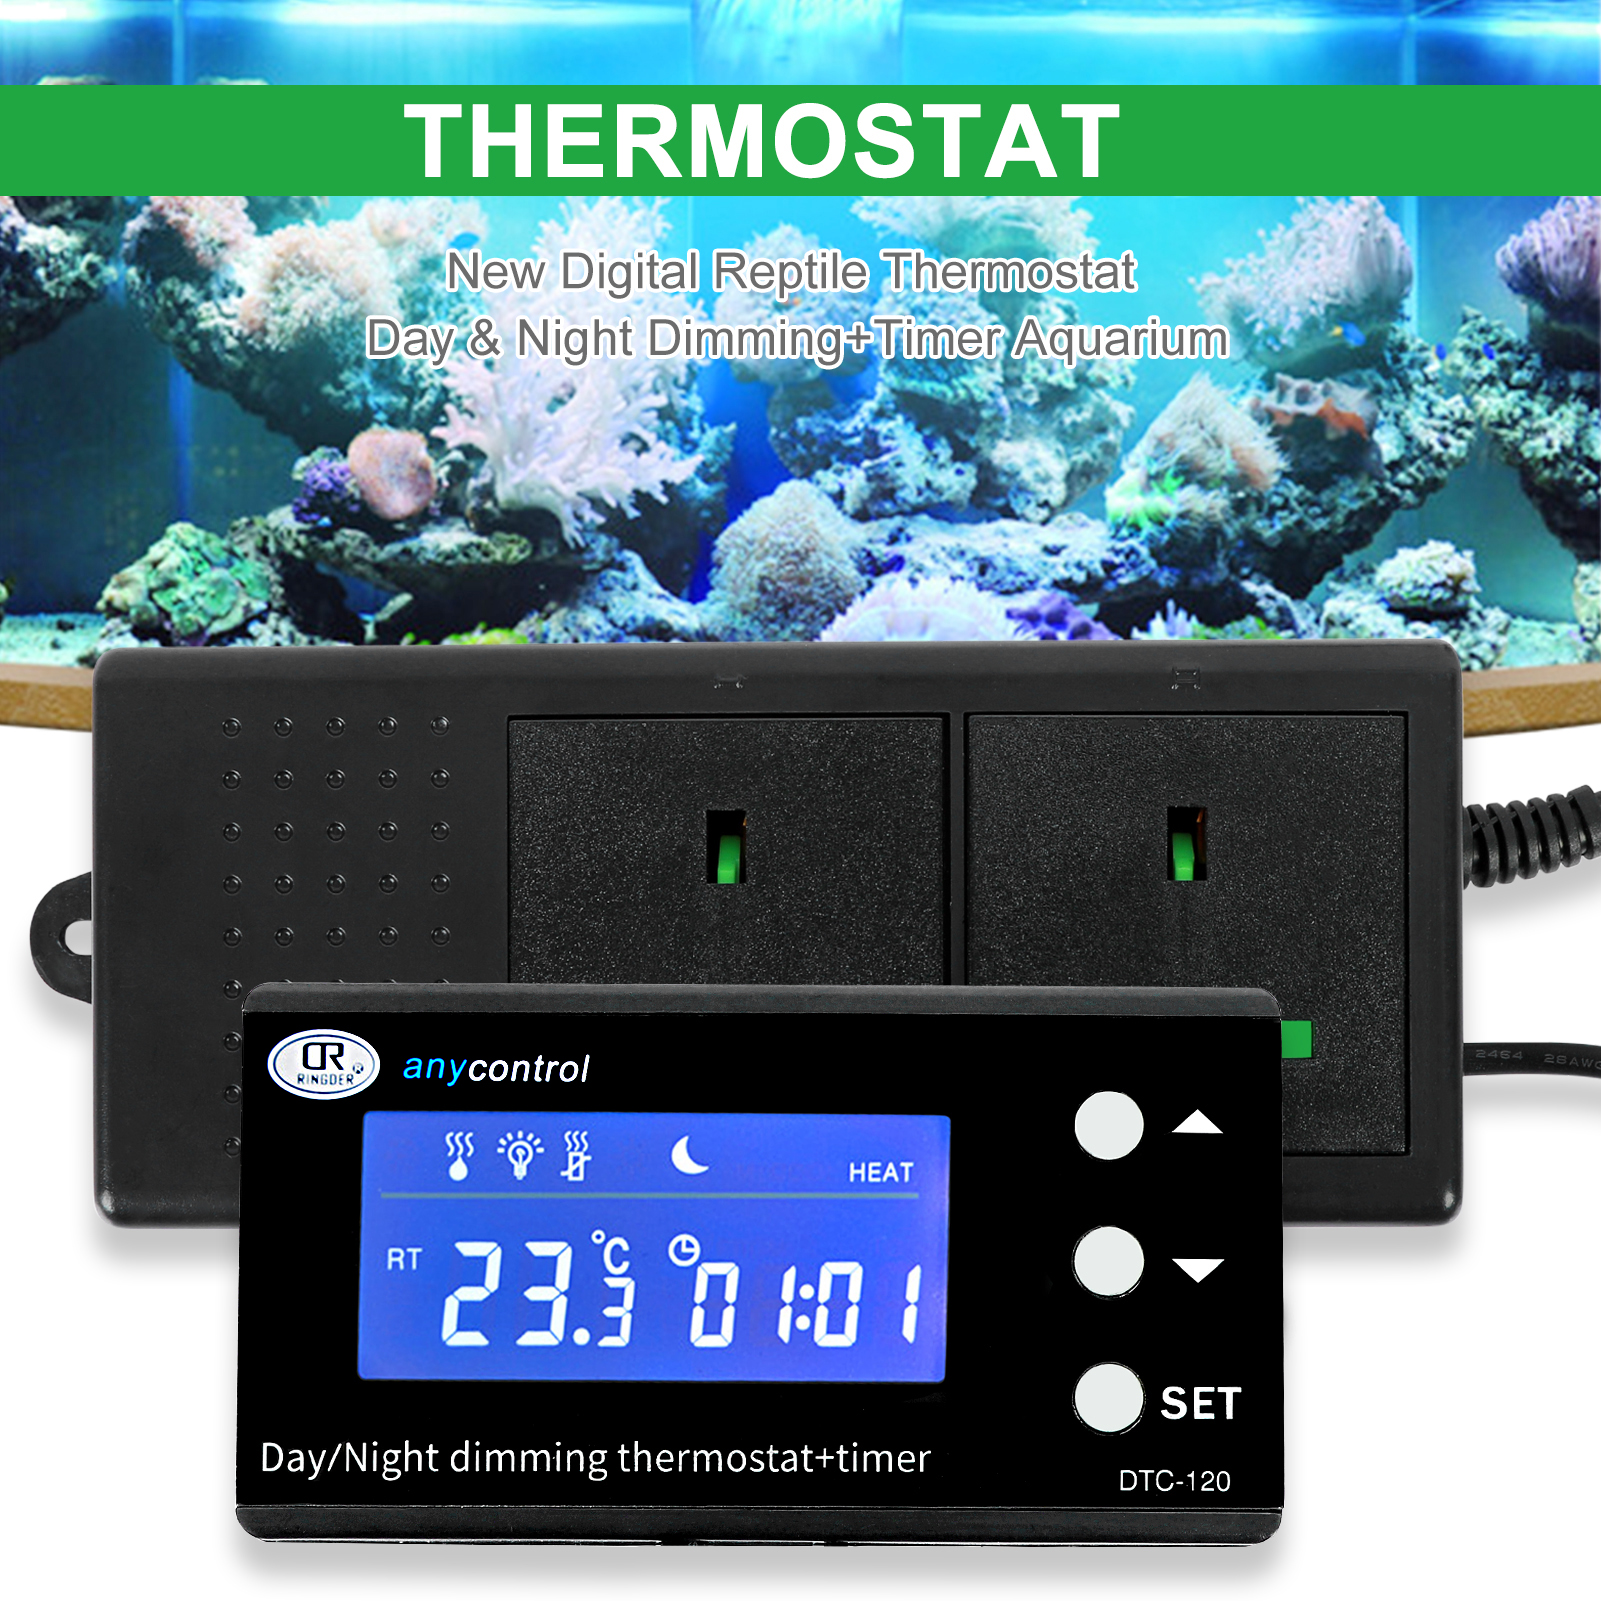 Digital Reptile Thermostat Easy to Use Fast Heating Plug And Play Precise for Lage prijs en hoge kwaliteit